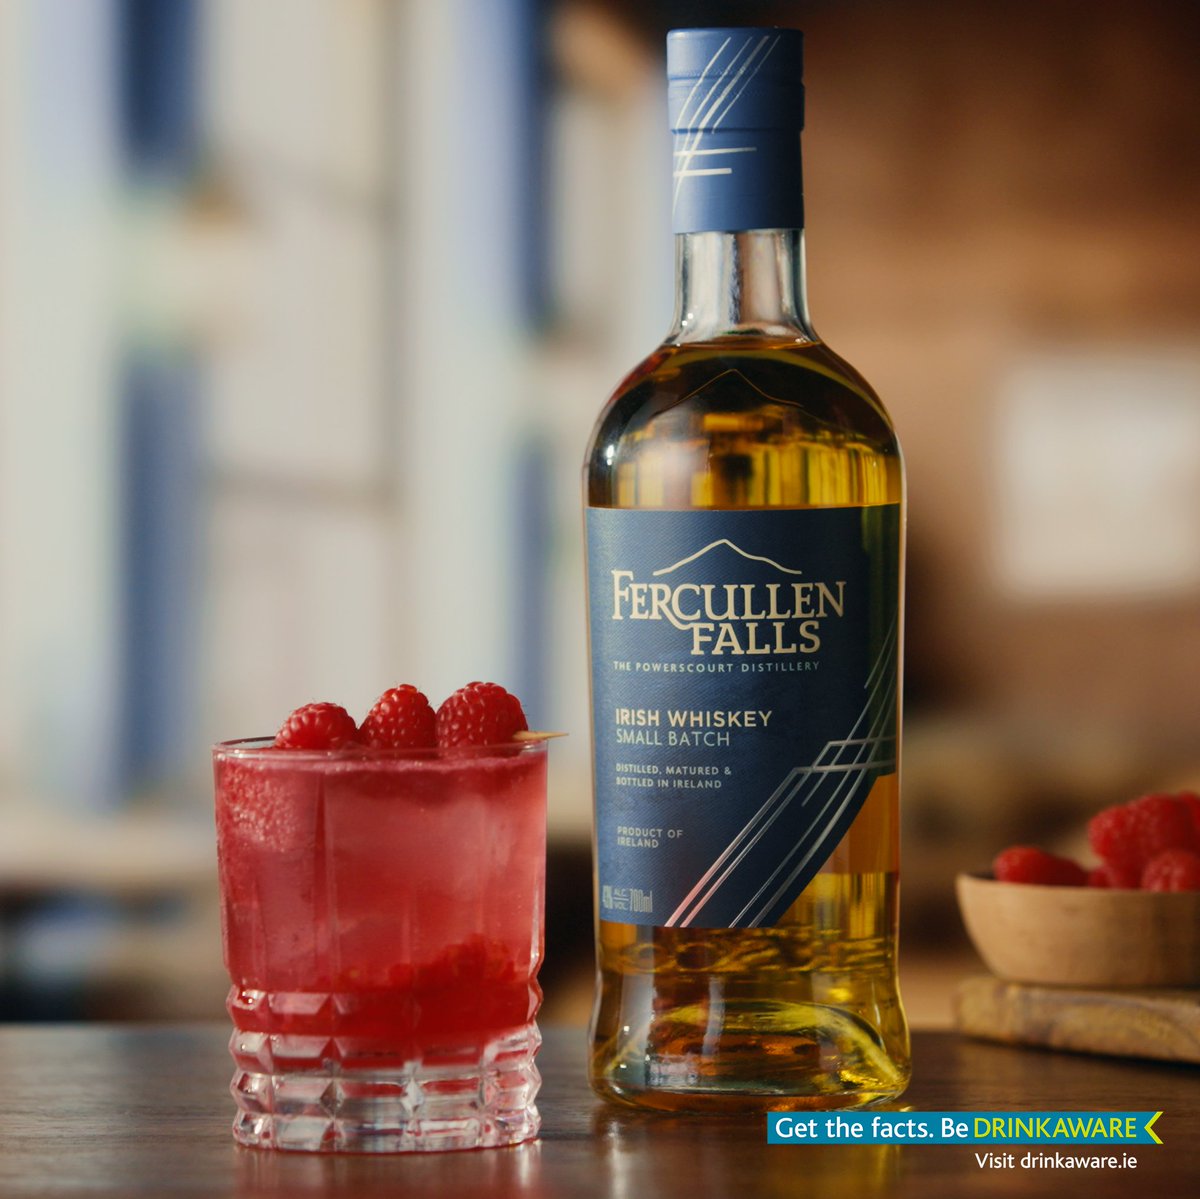 We know it's a Monday, but we can't let World Cocktail Day pass without sharing the perfect summer Fercullen Fáilte cocktail recipe 🍹🥃 👉Muddle 4 raspberries 👉50ml Fercullen Falls 👉20ml Lime Juice 👉20ml Raspberry Liquer 👉2 Dashes Angostura Bitters 👉Top up with Soda Water